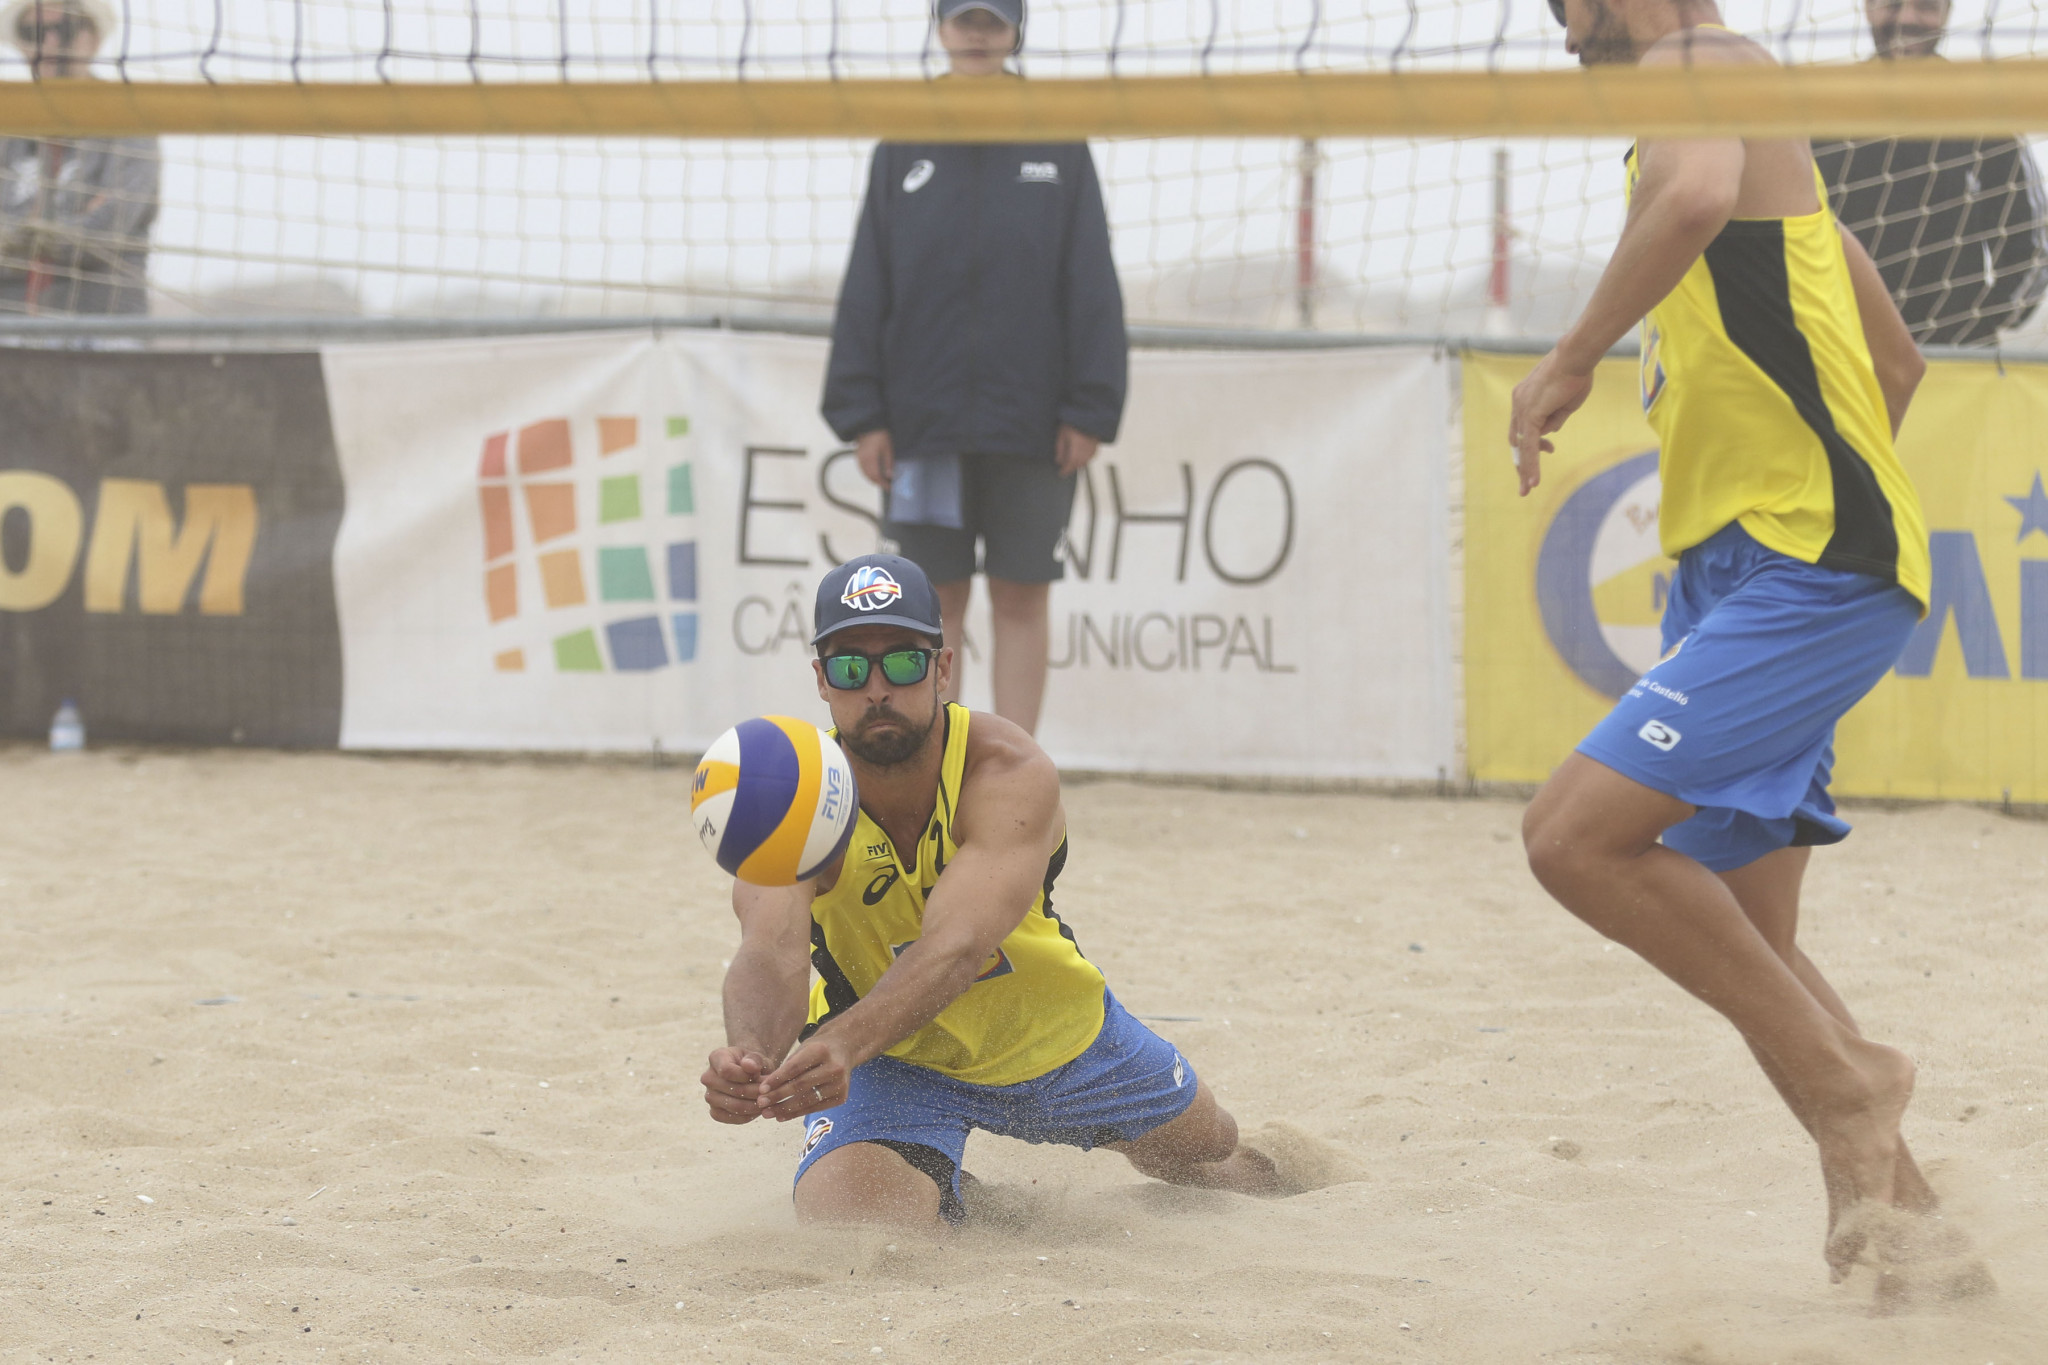 Legendary Spaniards Pablo Herrera and Adrian Gavira produced a superb display to defy the seeding in Pool F ©FIVB